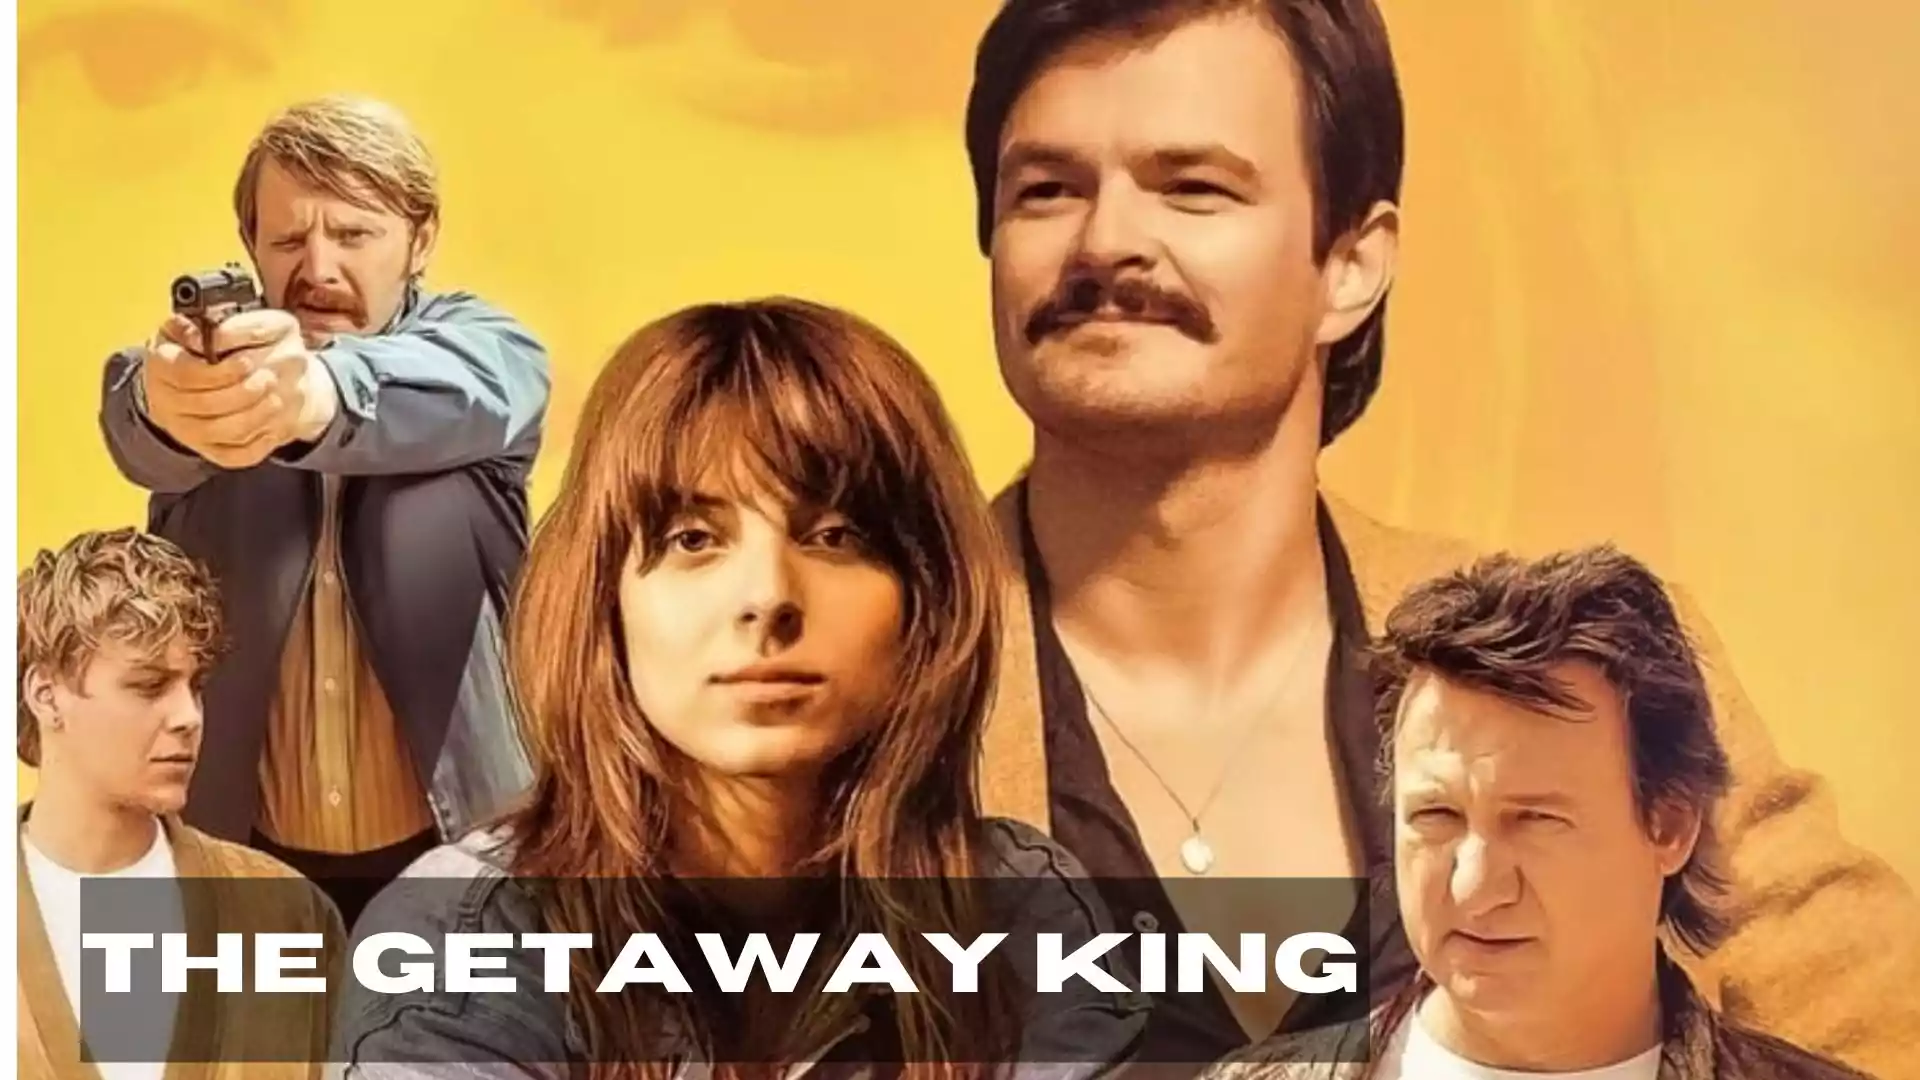 The Getaway King Parents Guide. The Getaway King Age Rating.